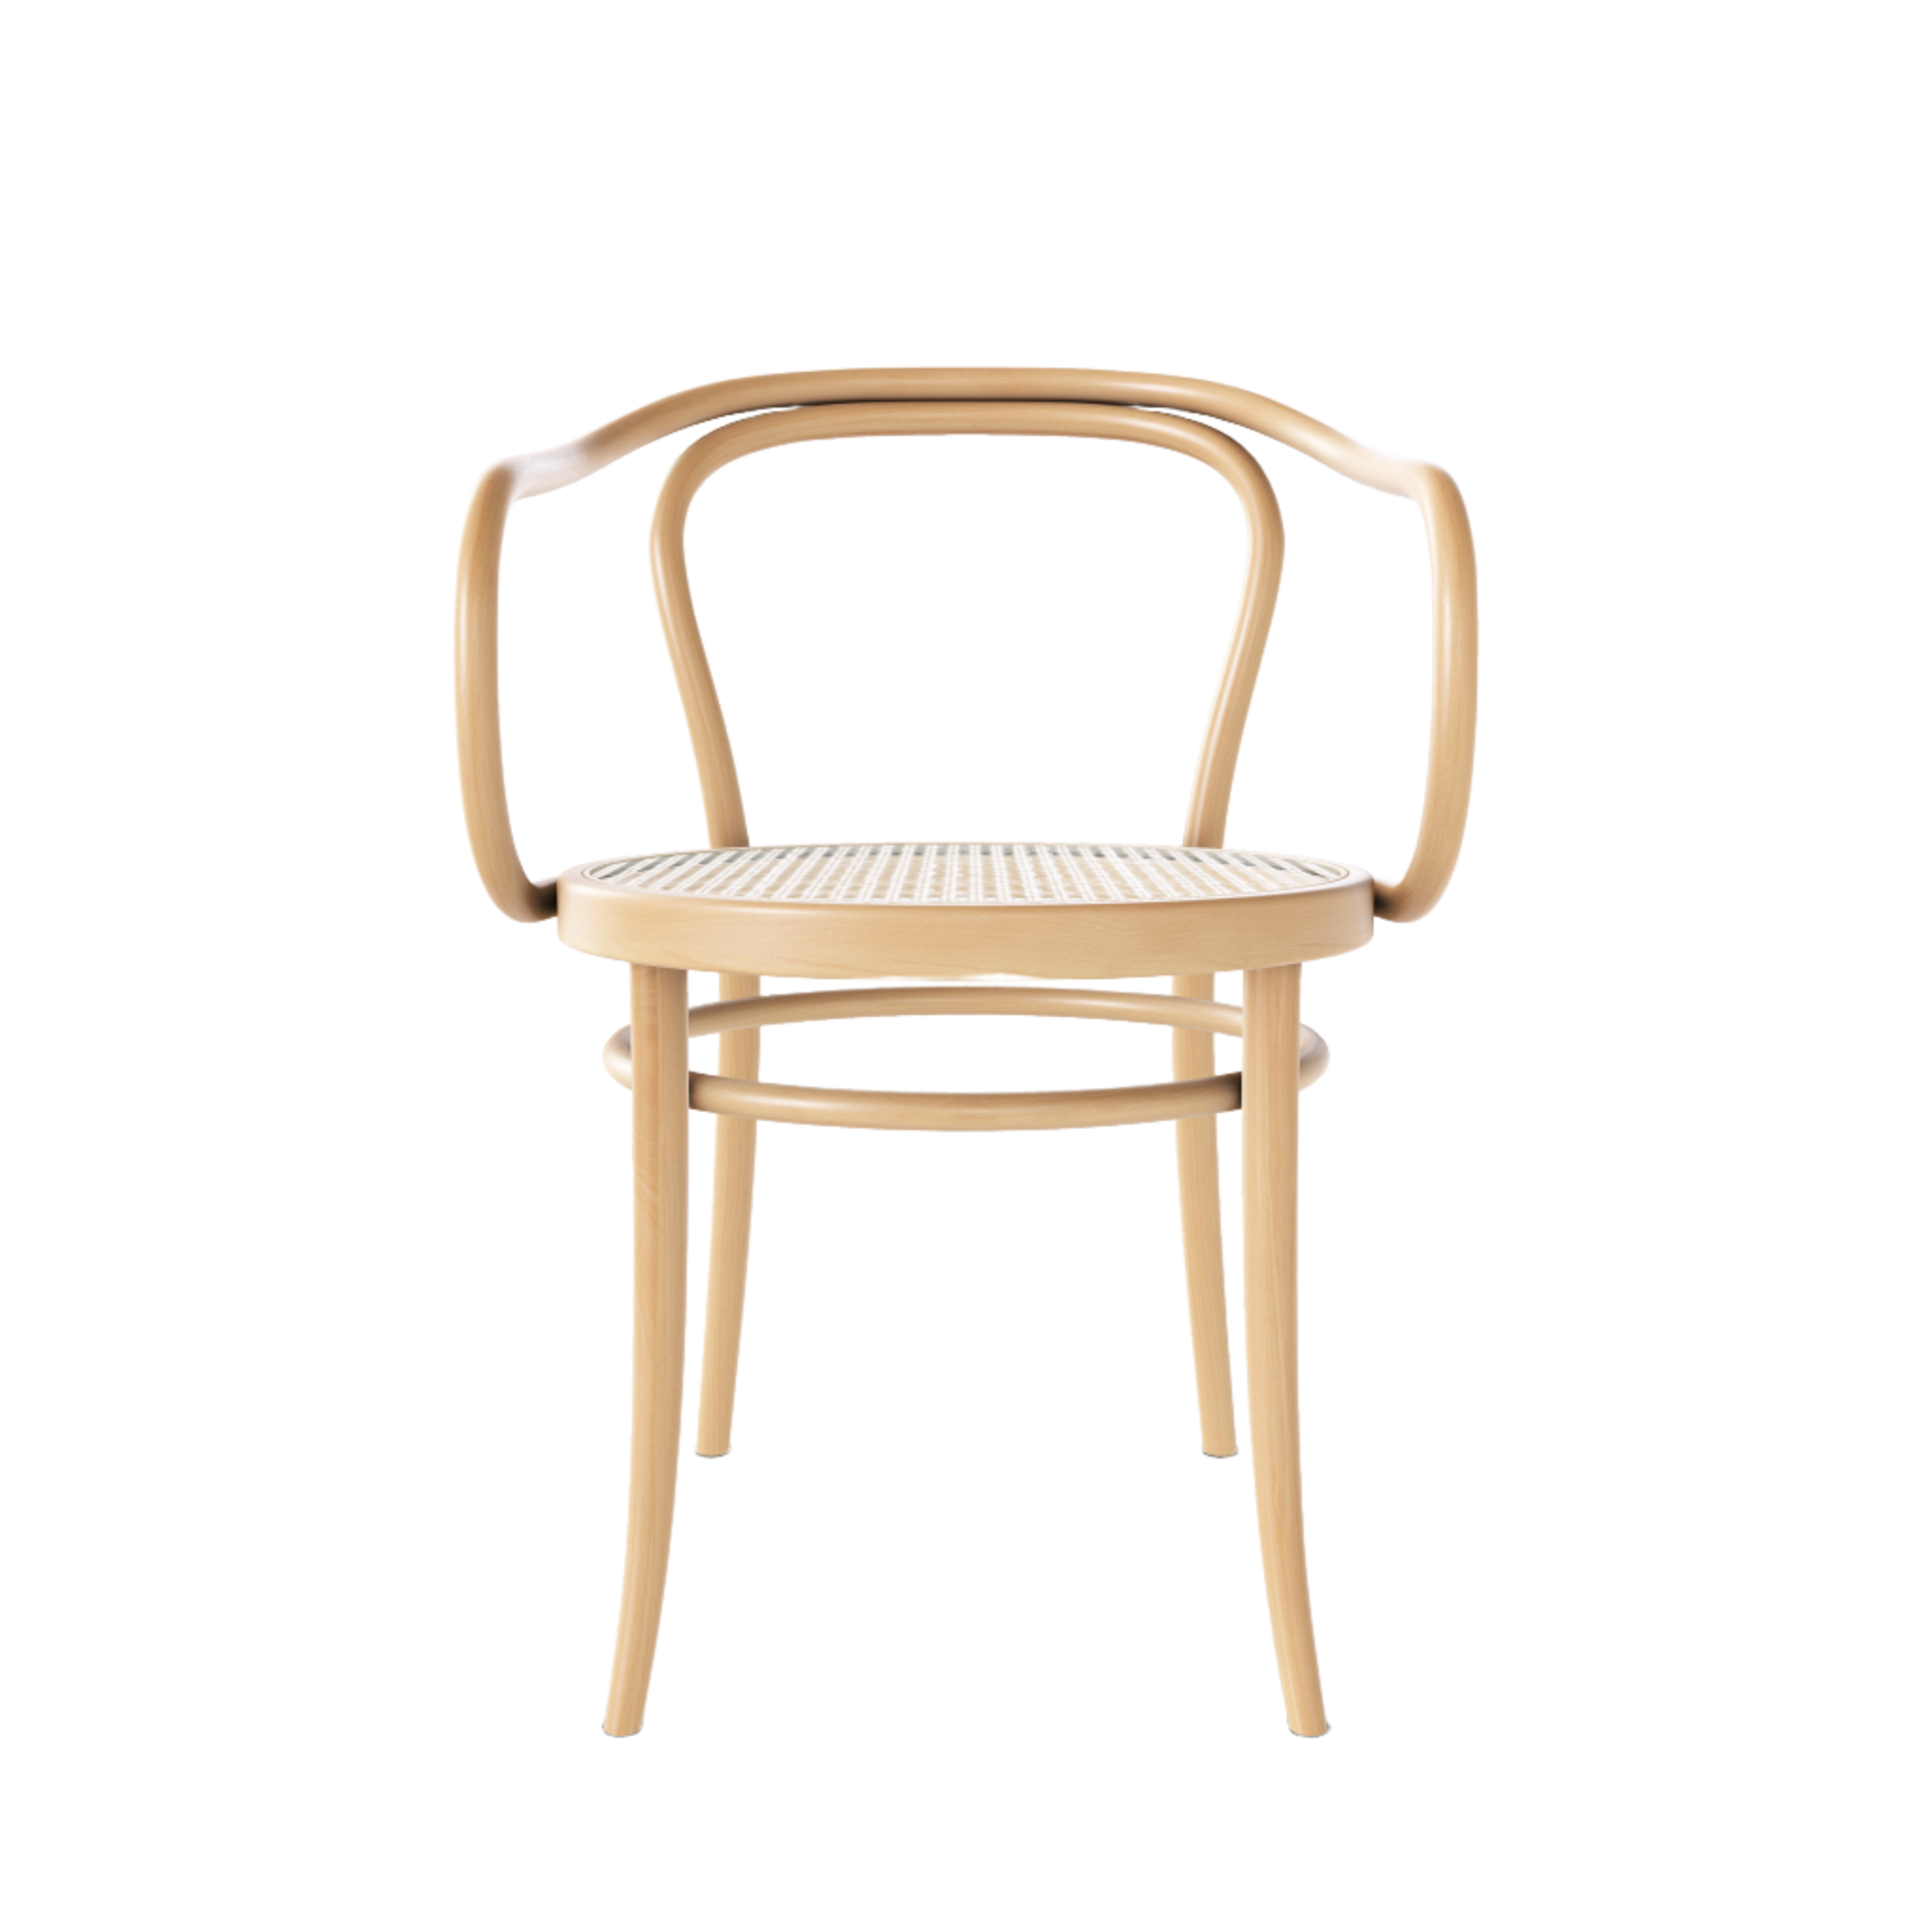 Ton 30 Armchair with cane seat in natural beech